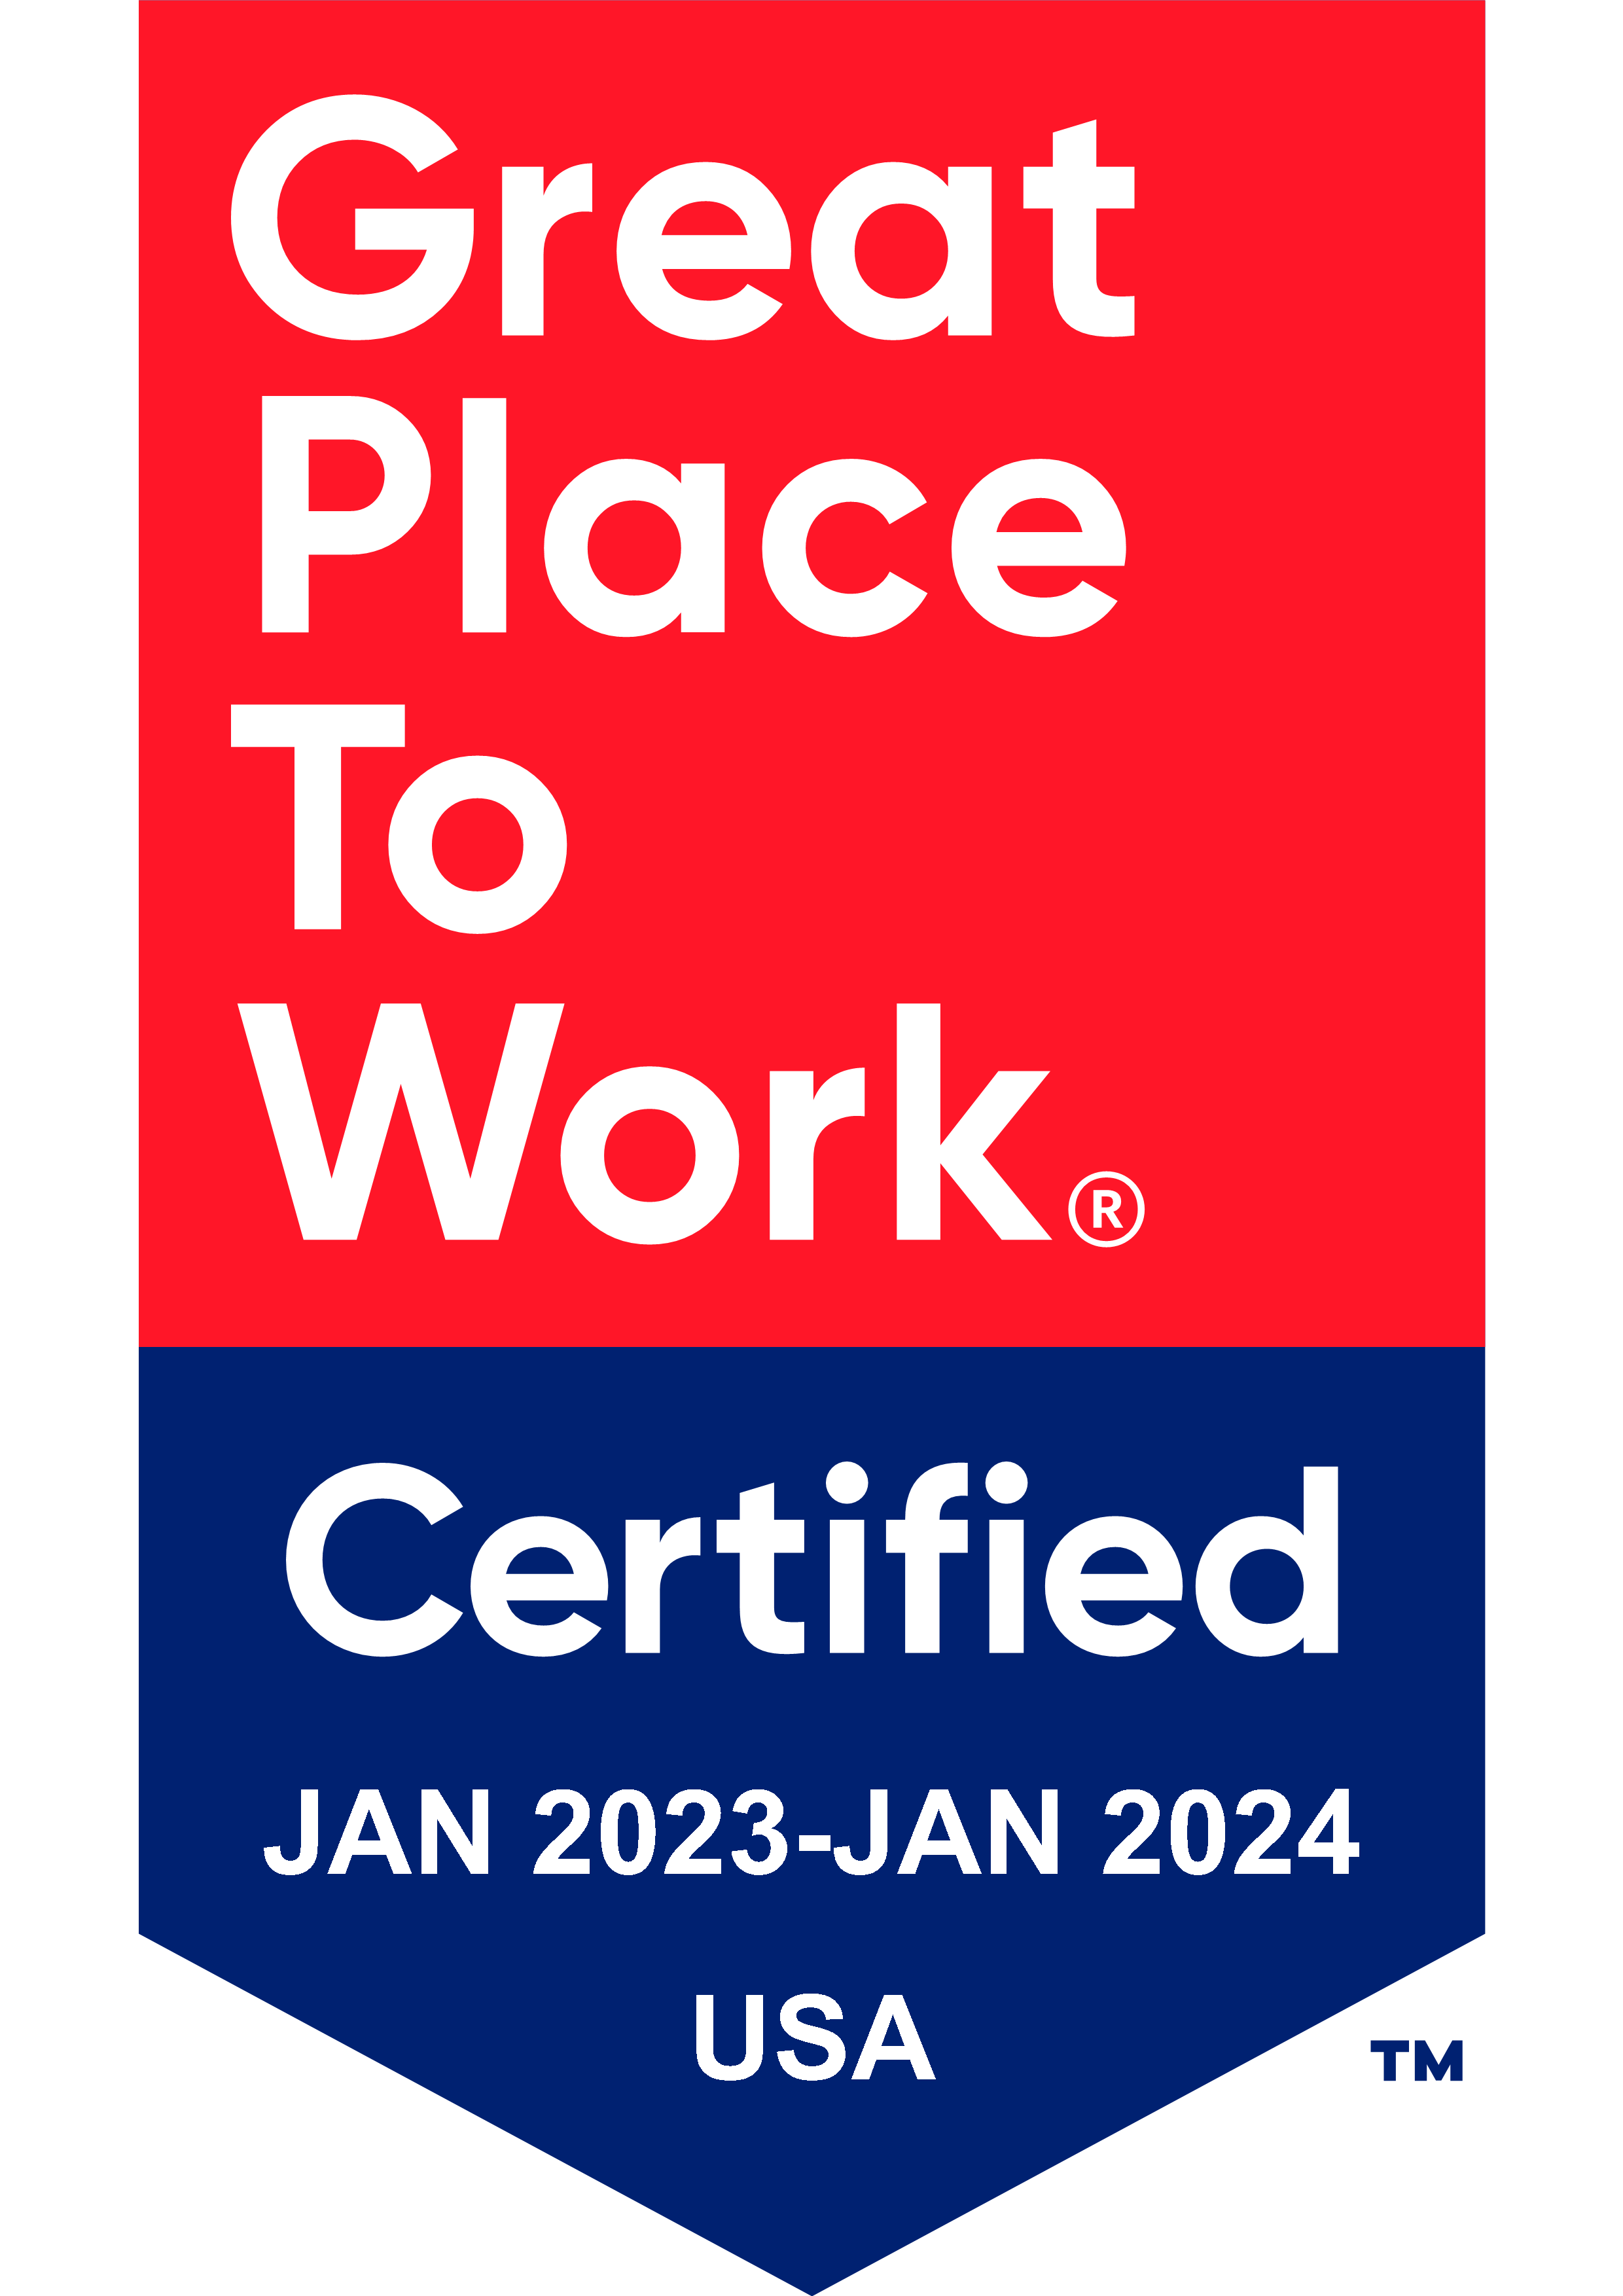 HRG is a 2023 certified Great Place to Work!